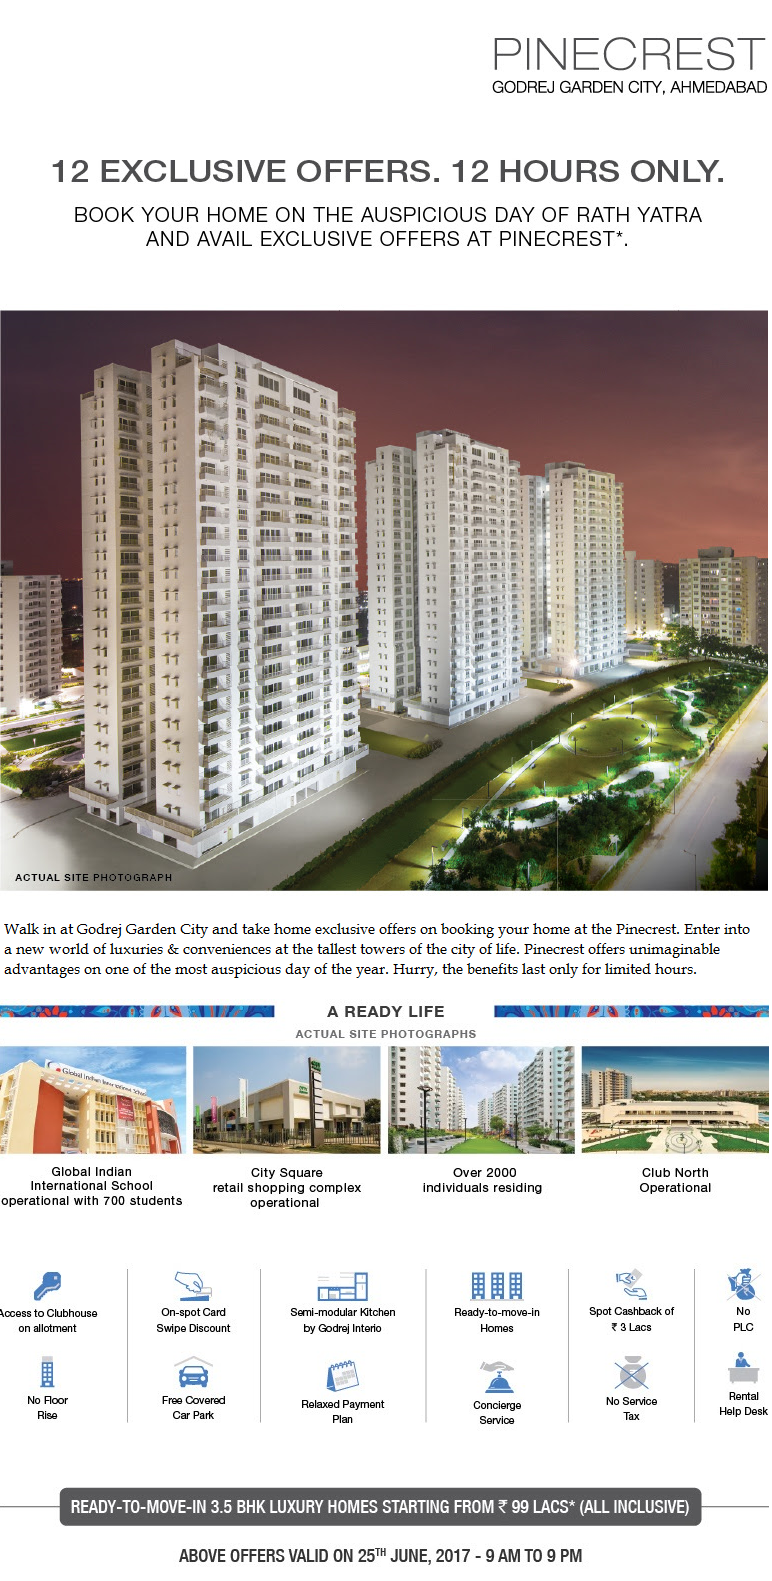 Walk in at Godrej Garden City and take home exclusive offers on booking your home at the Pinecrest